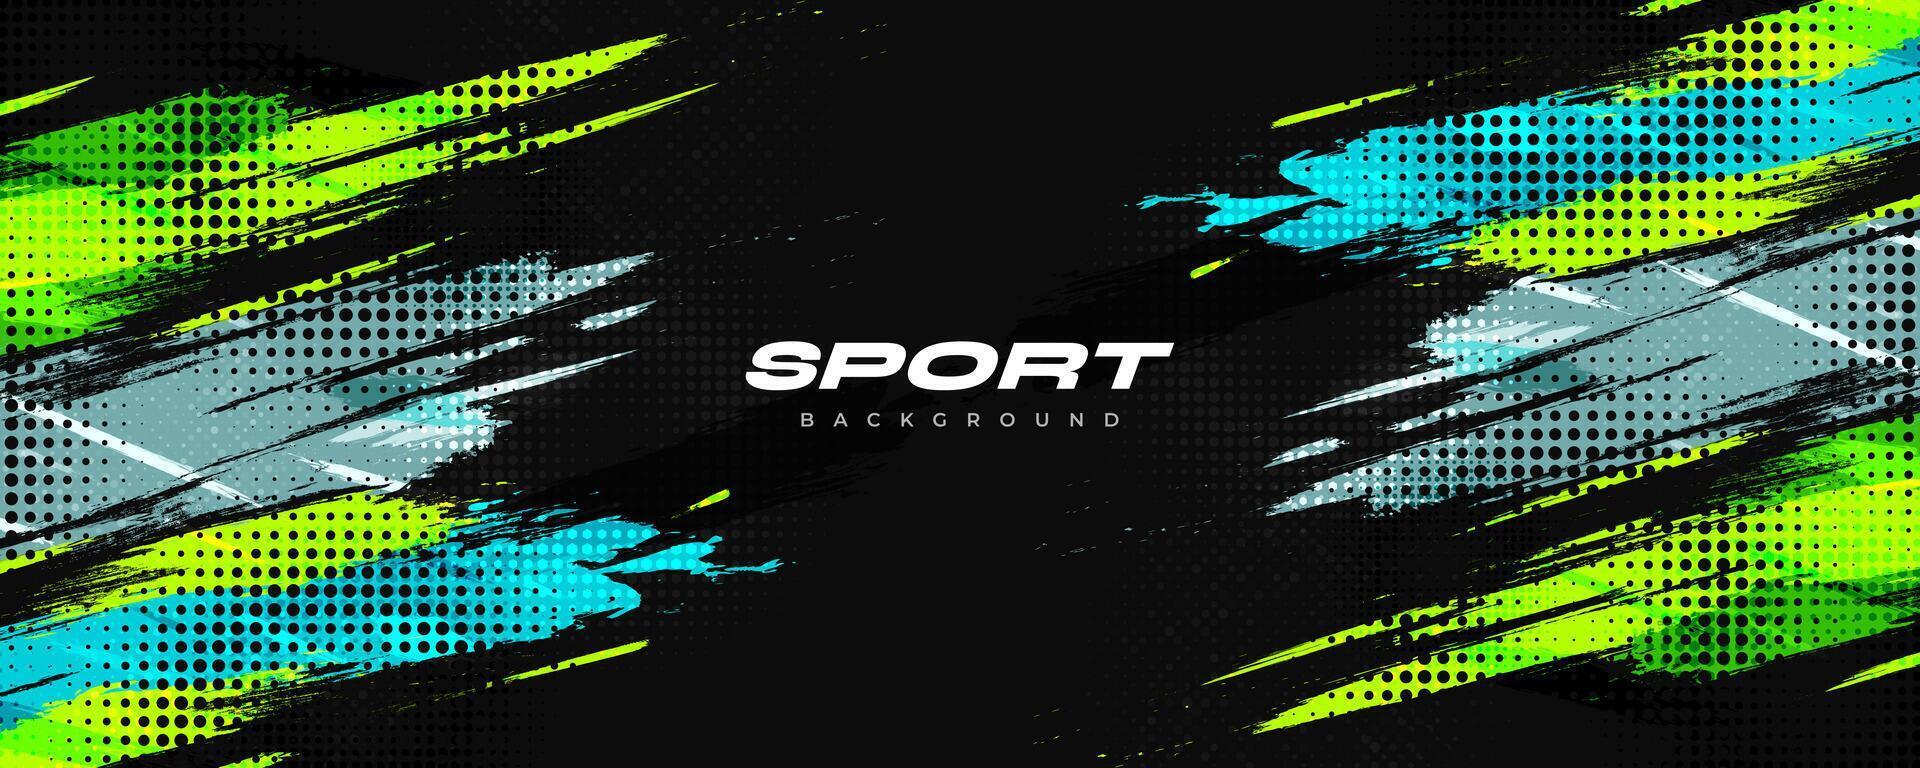 Sport Background with Grunge Brush Texture and Halftone Effect vector